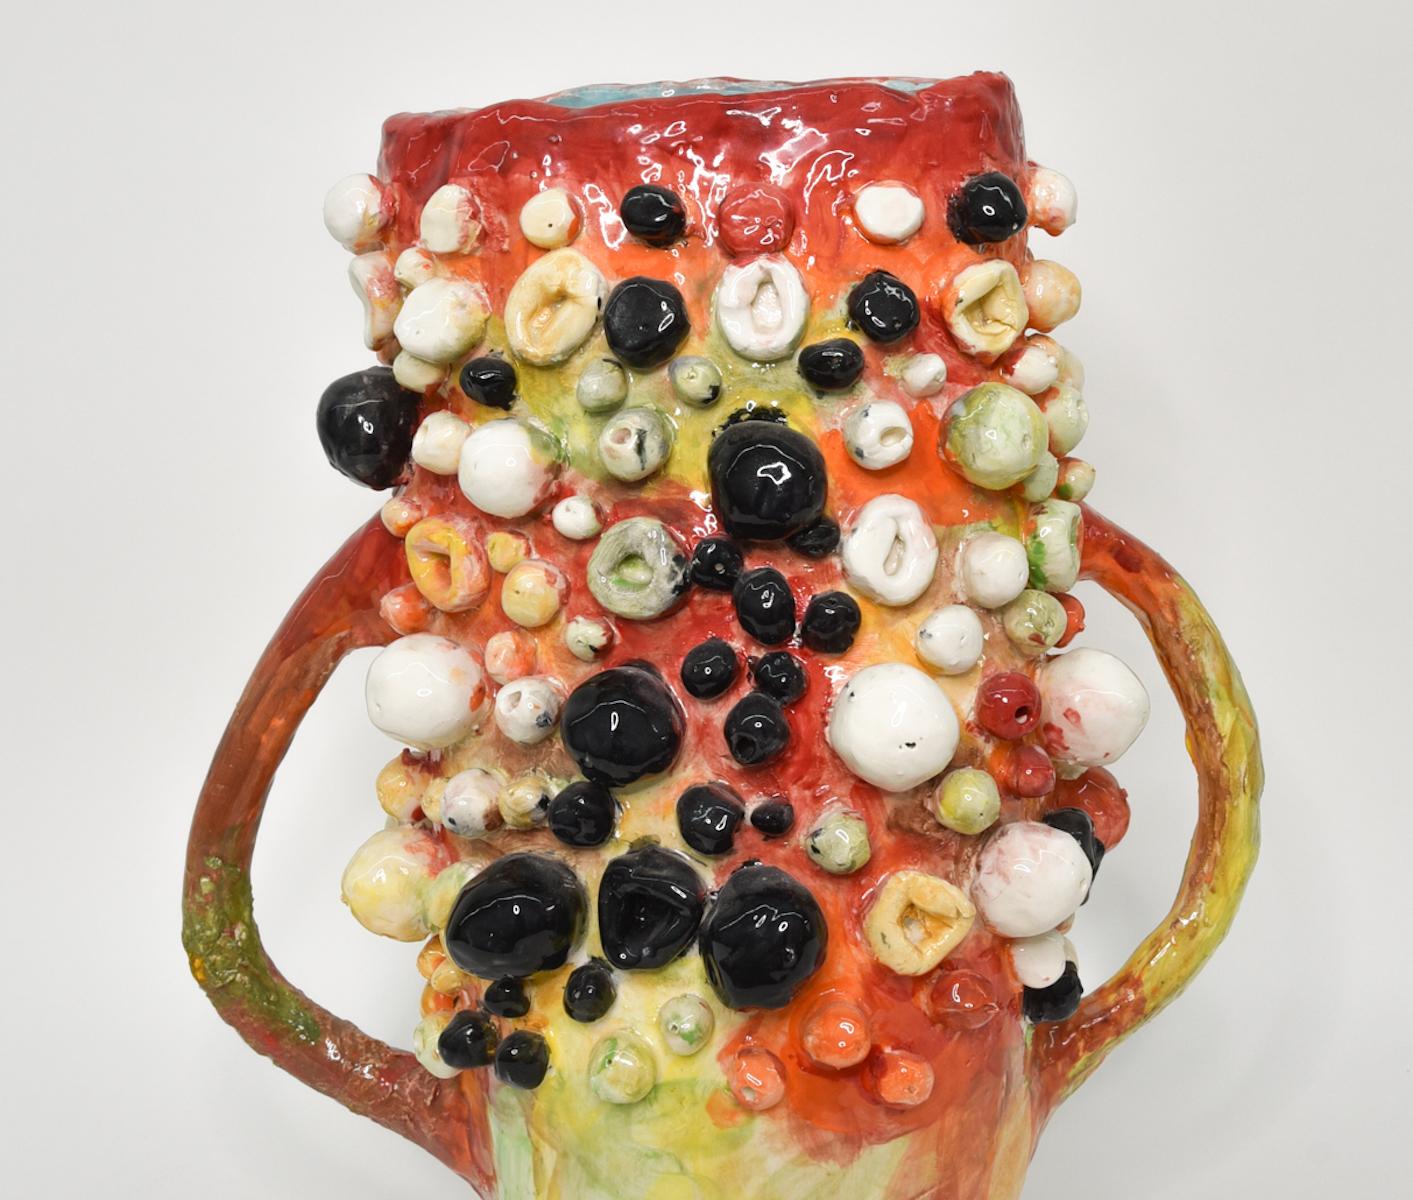 Untitled XXI. Glazed ceramic abstract jar sculpture - Abstract Sculpture by Charo Oquet